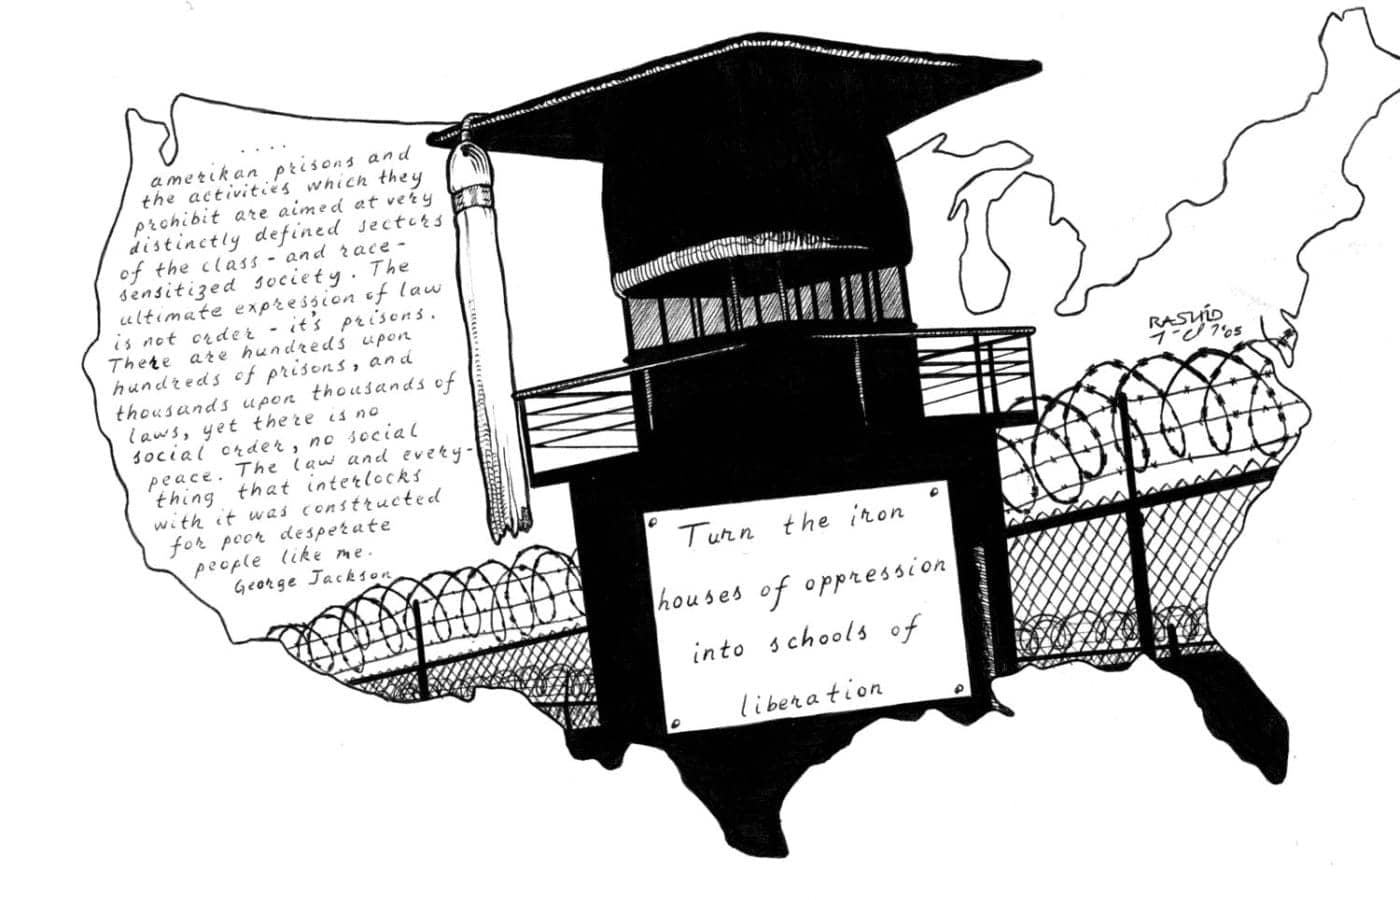 Turn-the-iron-houses-of-oppression-into-schools-of-liberation-art-by-Rashid-2005-1400x900, A call to support the men at Florida State Prison , Behind Enemy Lines 